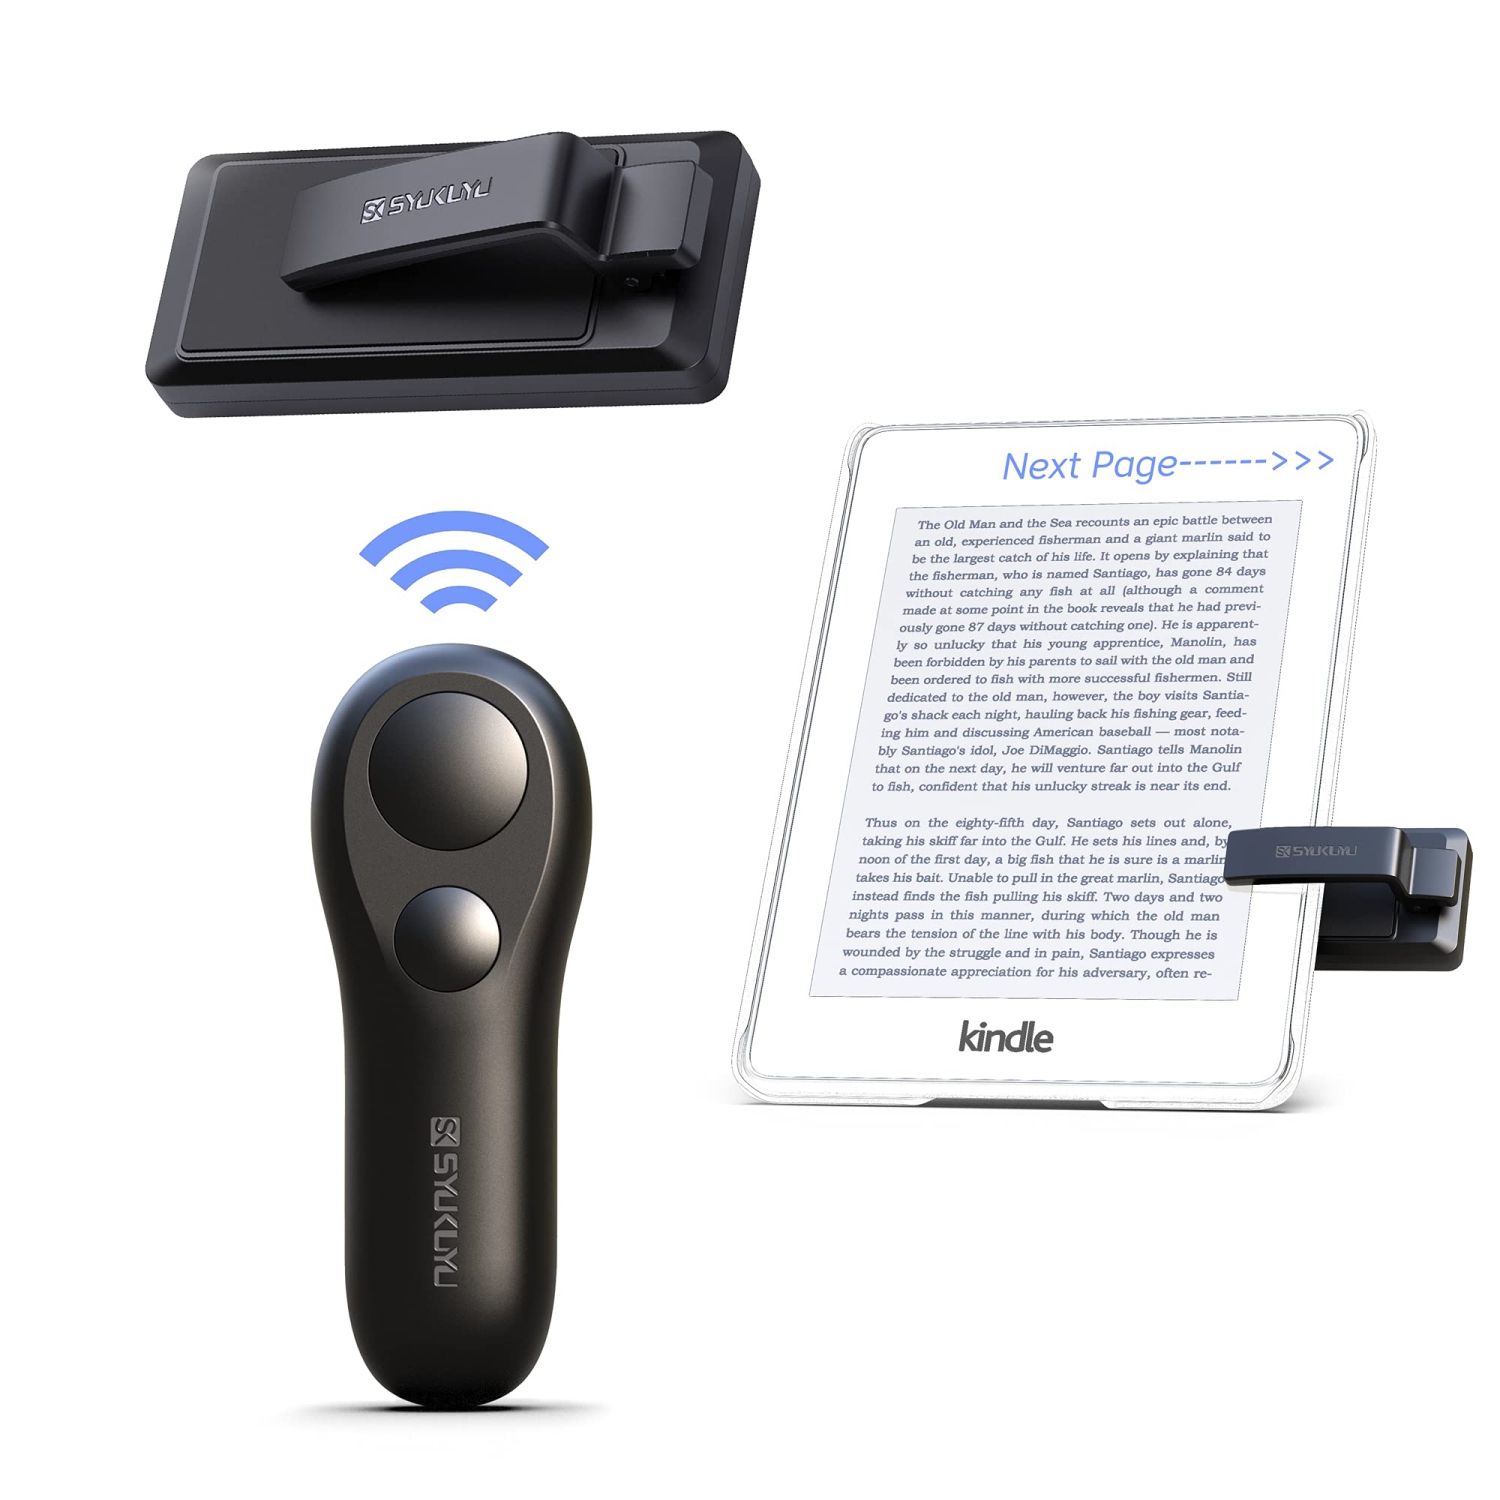 RF Remote Control Page Turner for Kindle Reading Ipad Surface Comics, iPhone Android Tablets Reading Novels Taking Photos